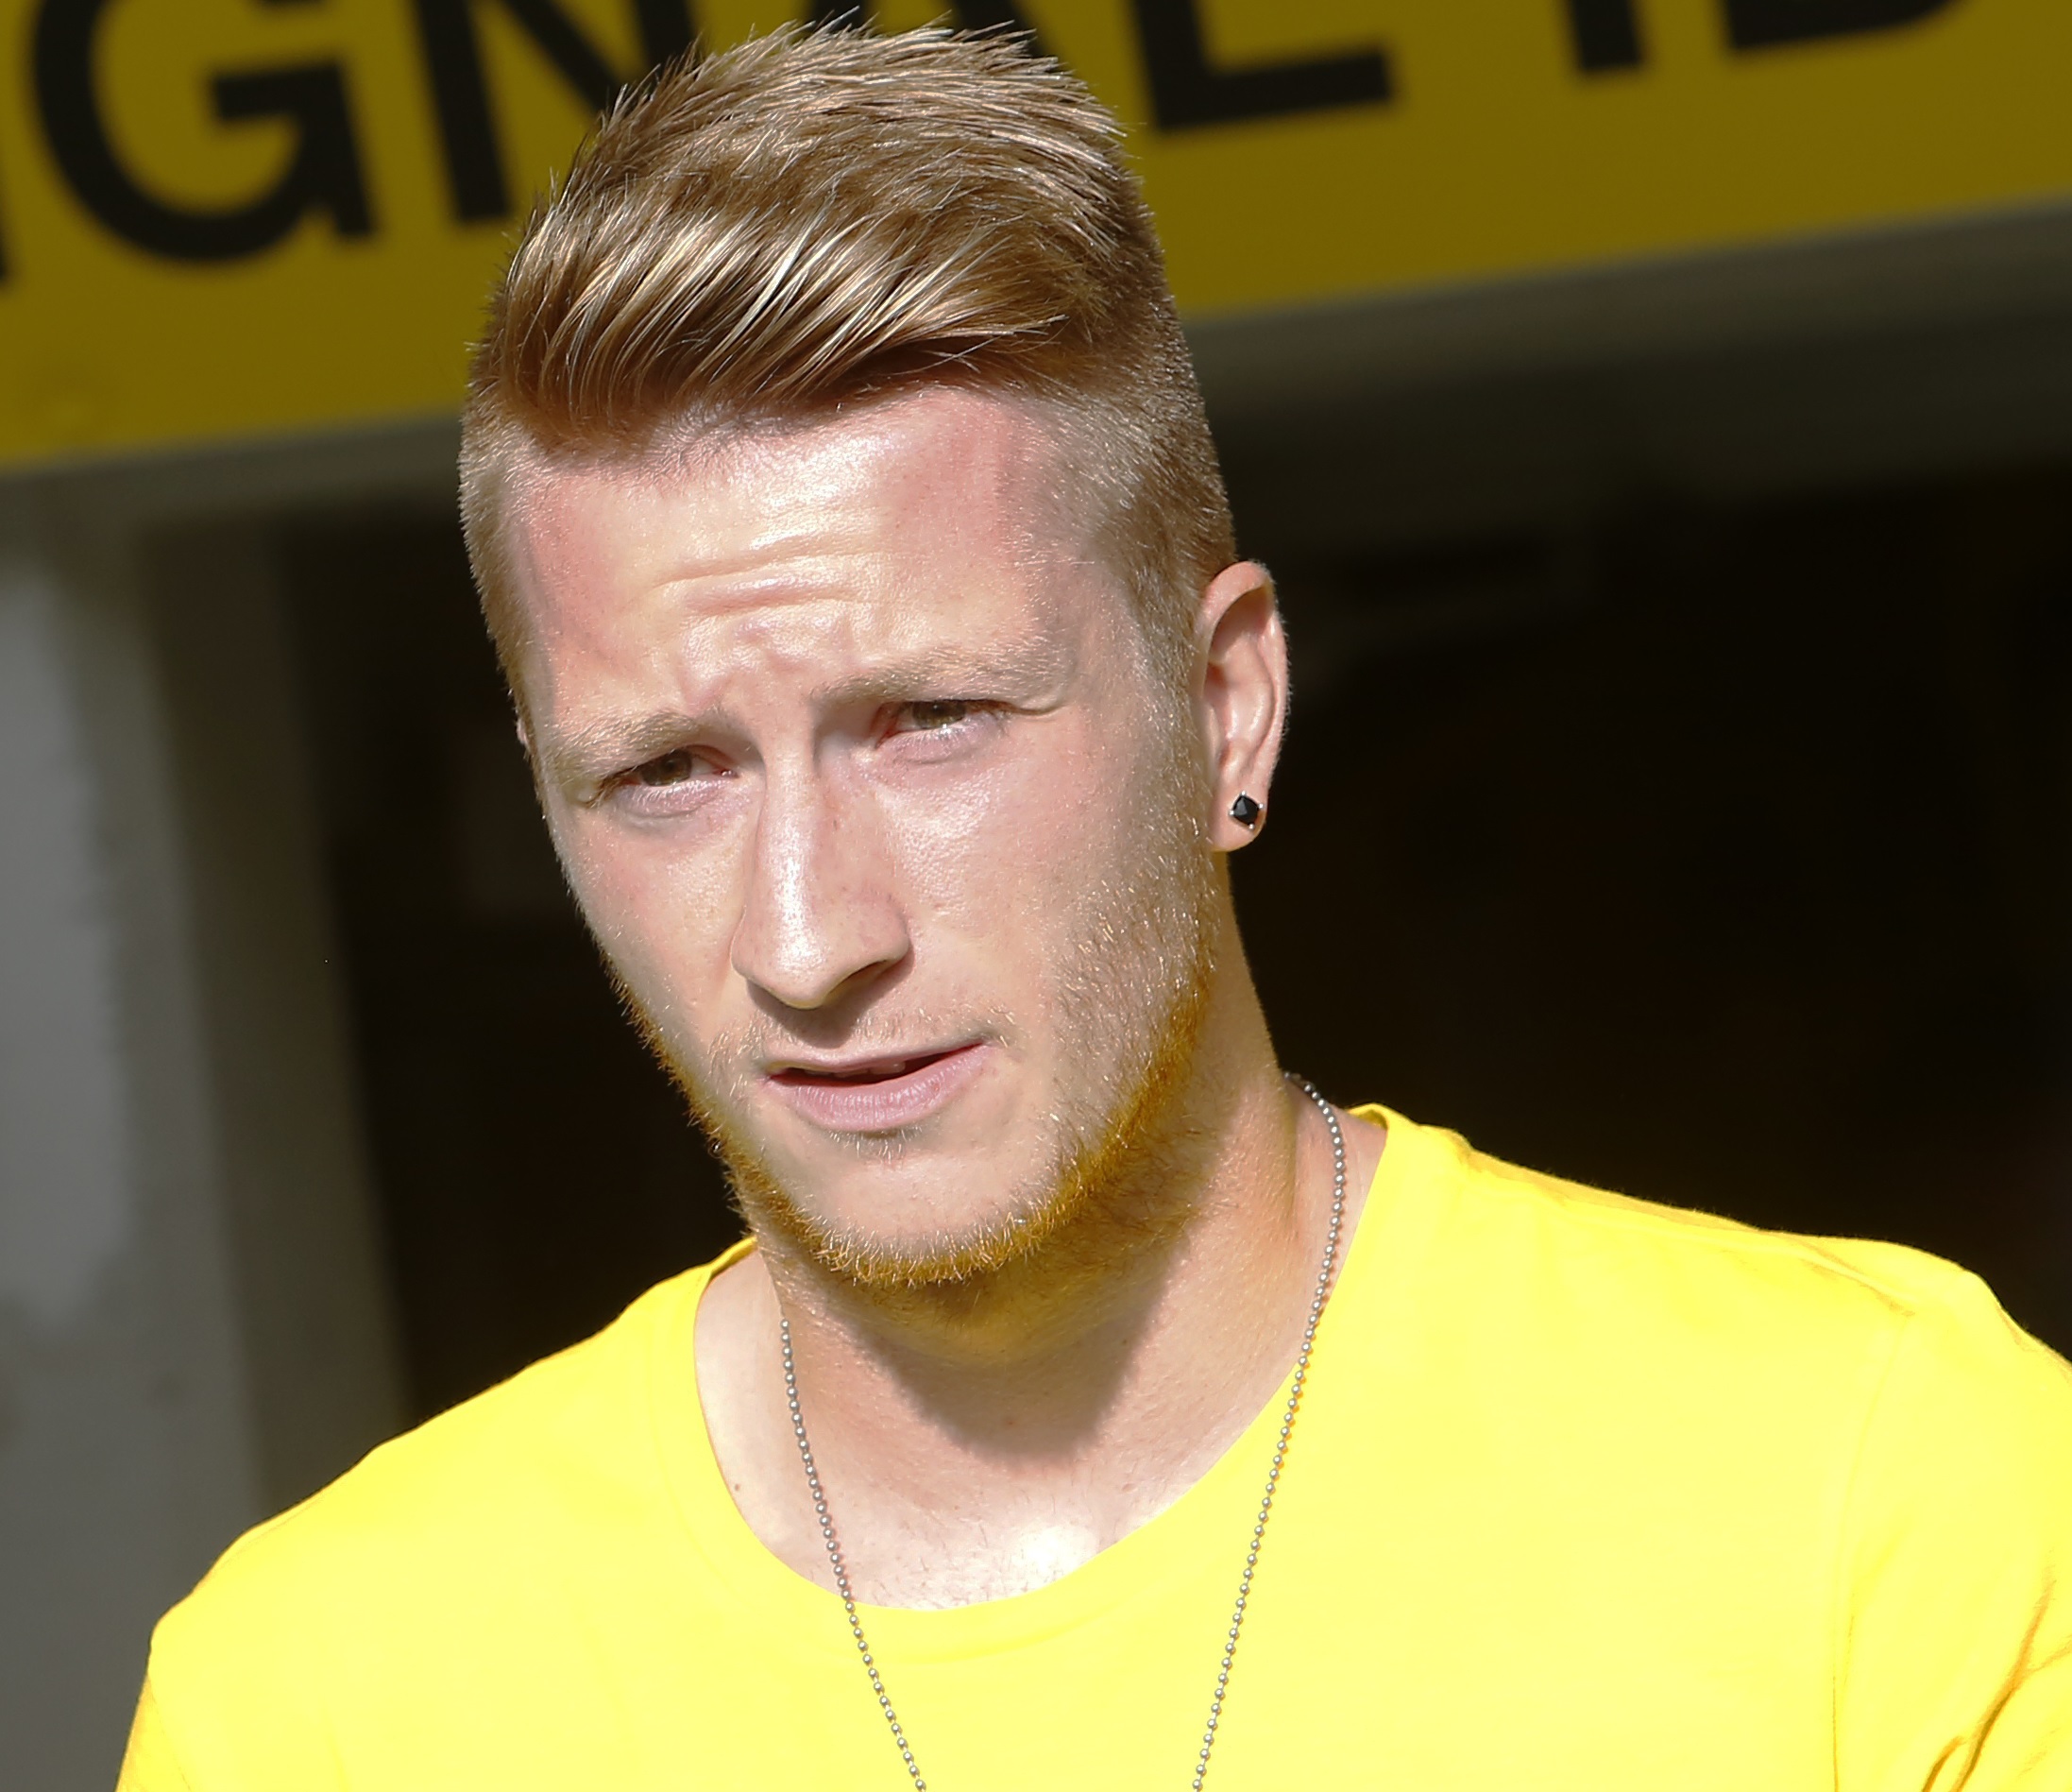 Marco Reus extends contract by one year with Borussia Dortmund | Football  News - Times of India